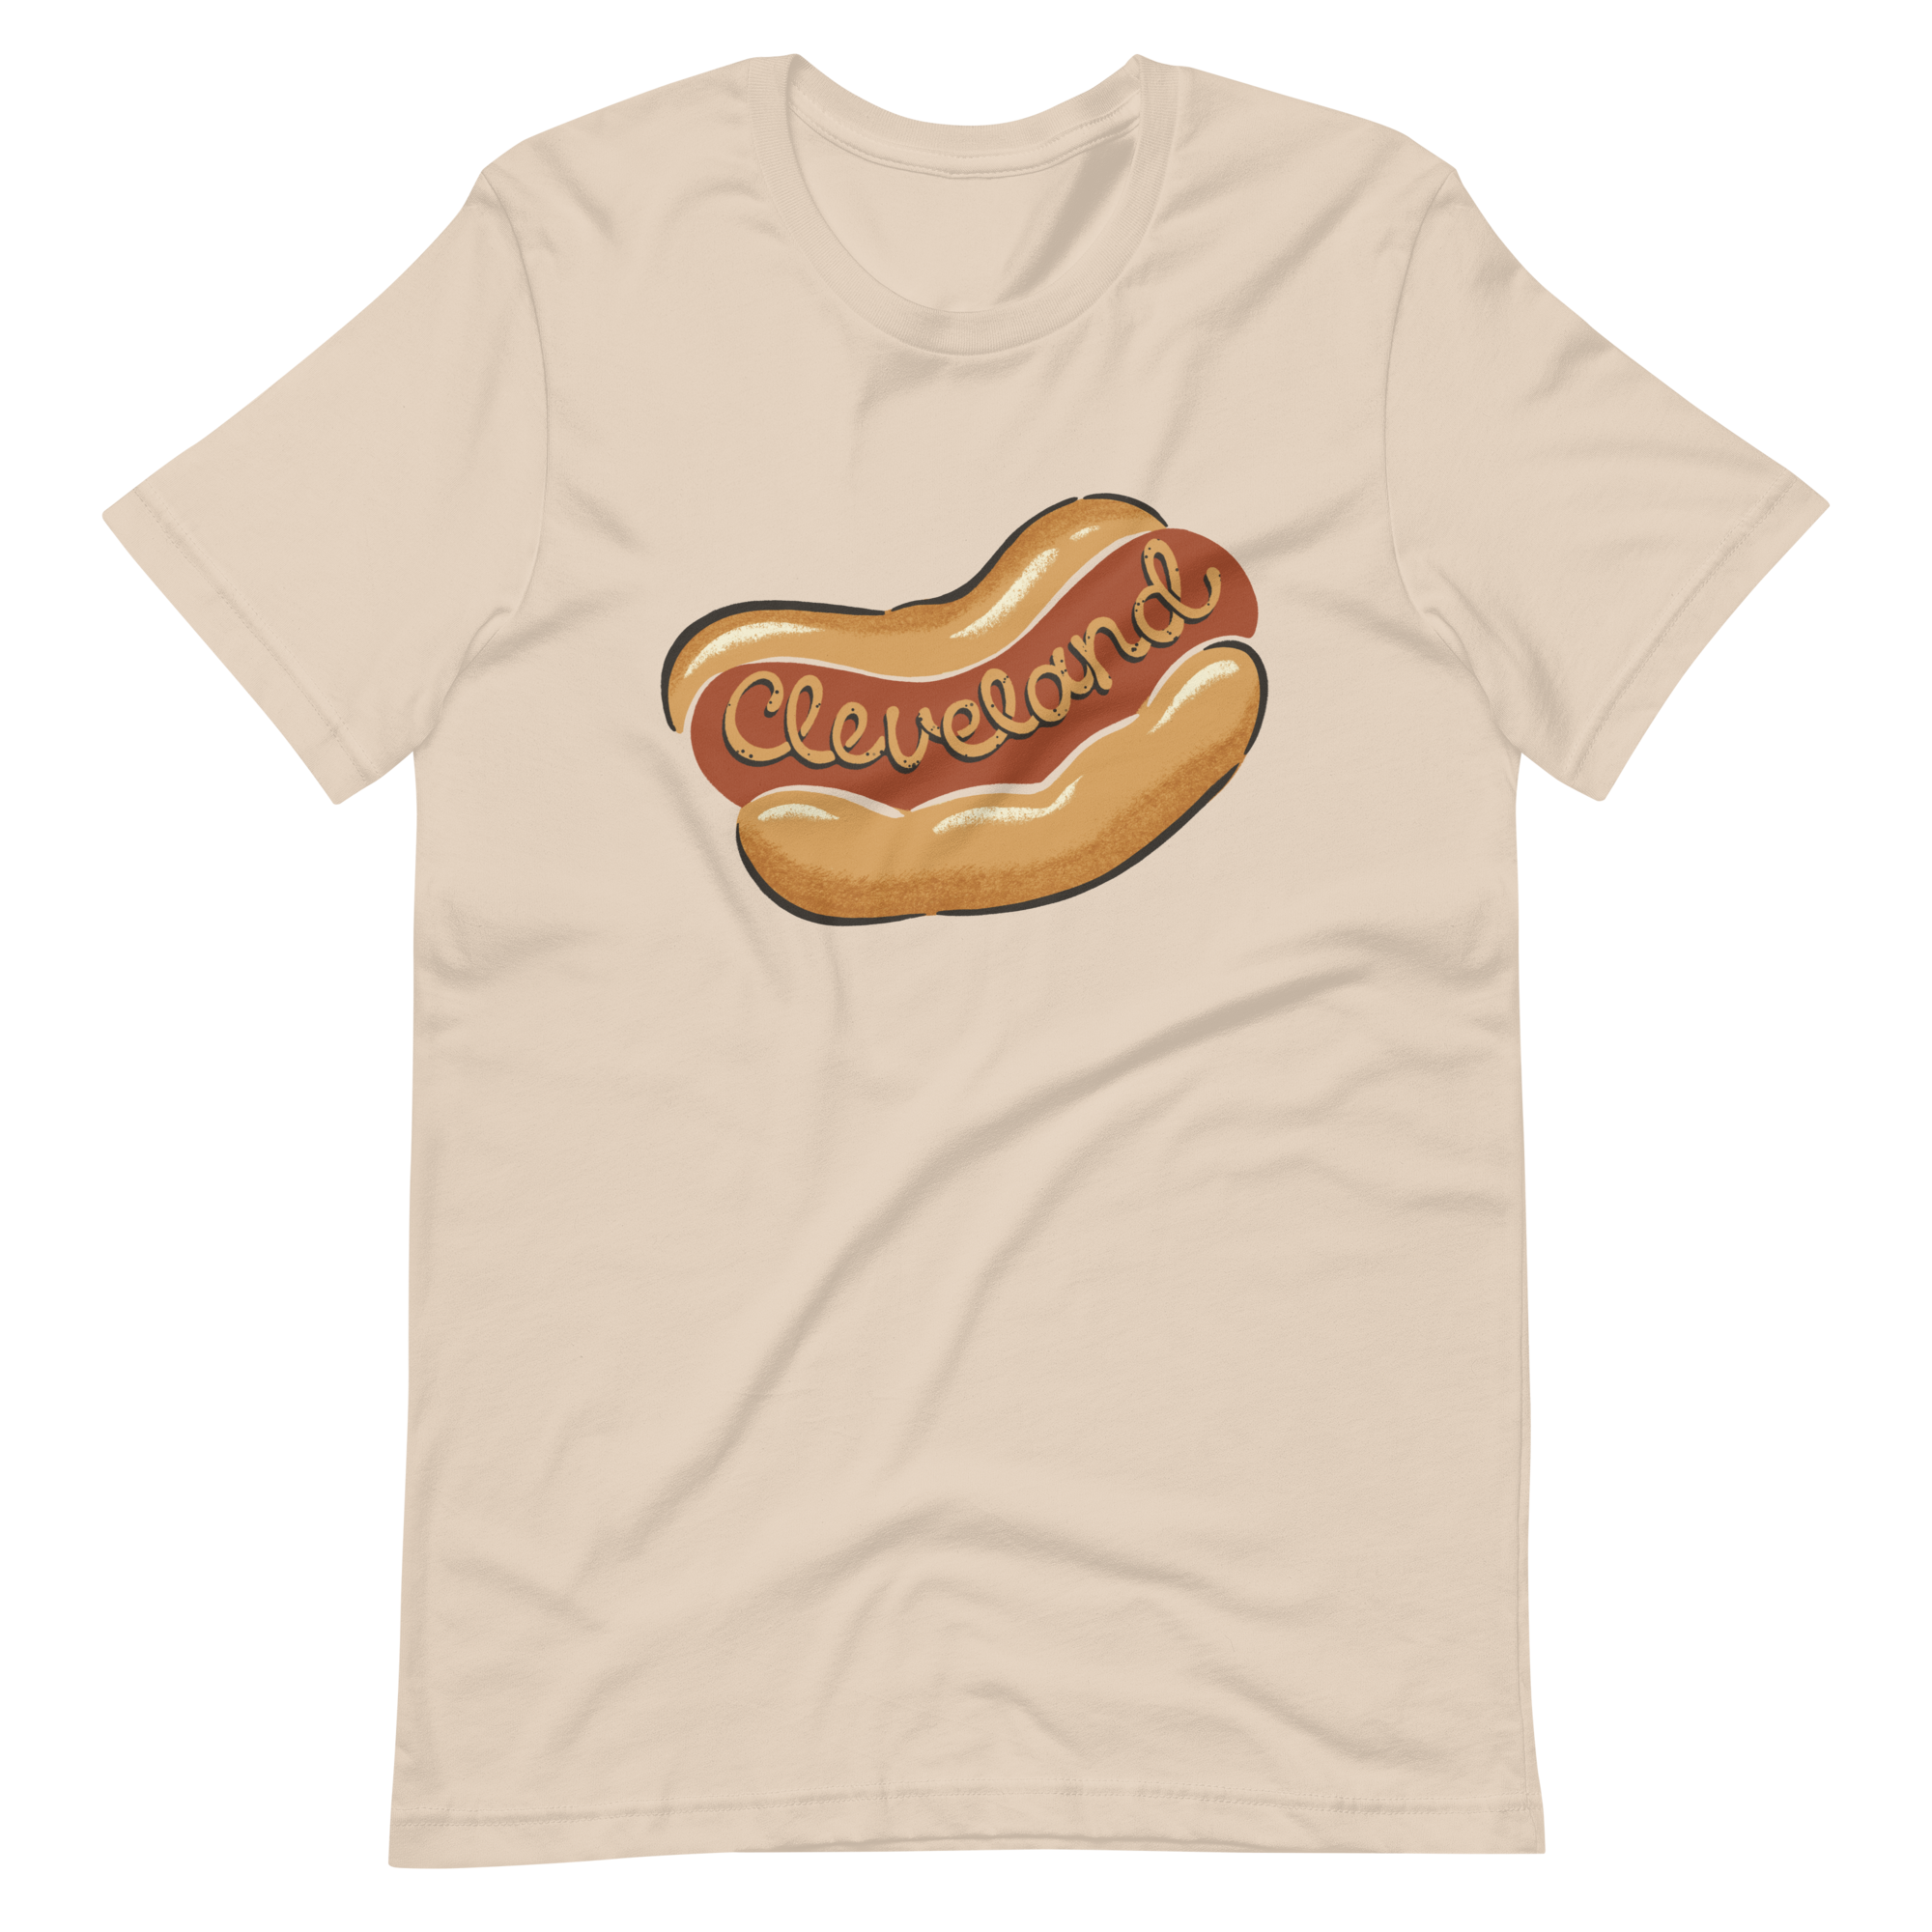 Who's your dog? Cleveland Hot Dogs T shirt - ShopperBoard